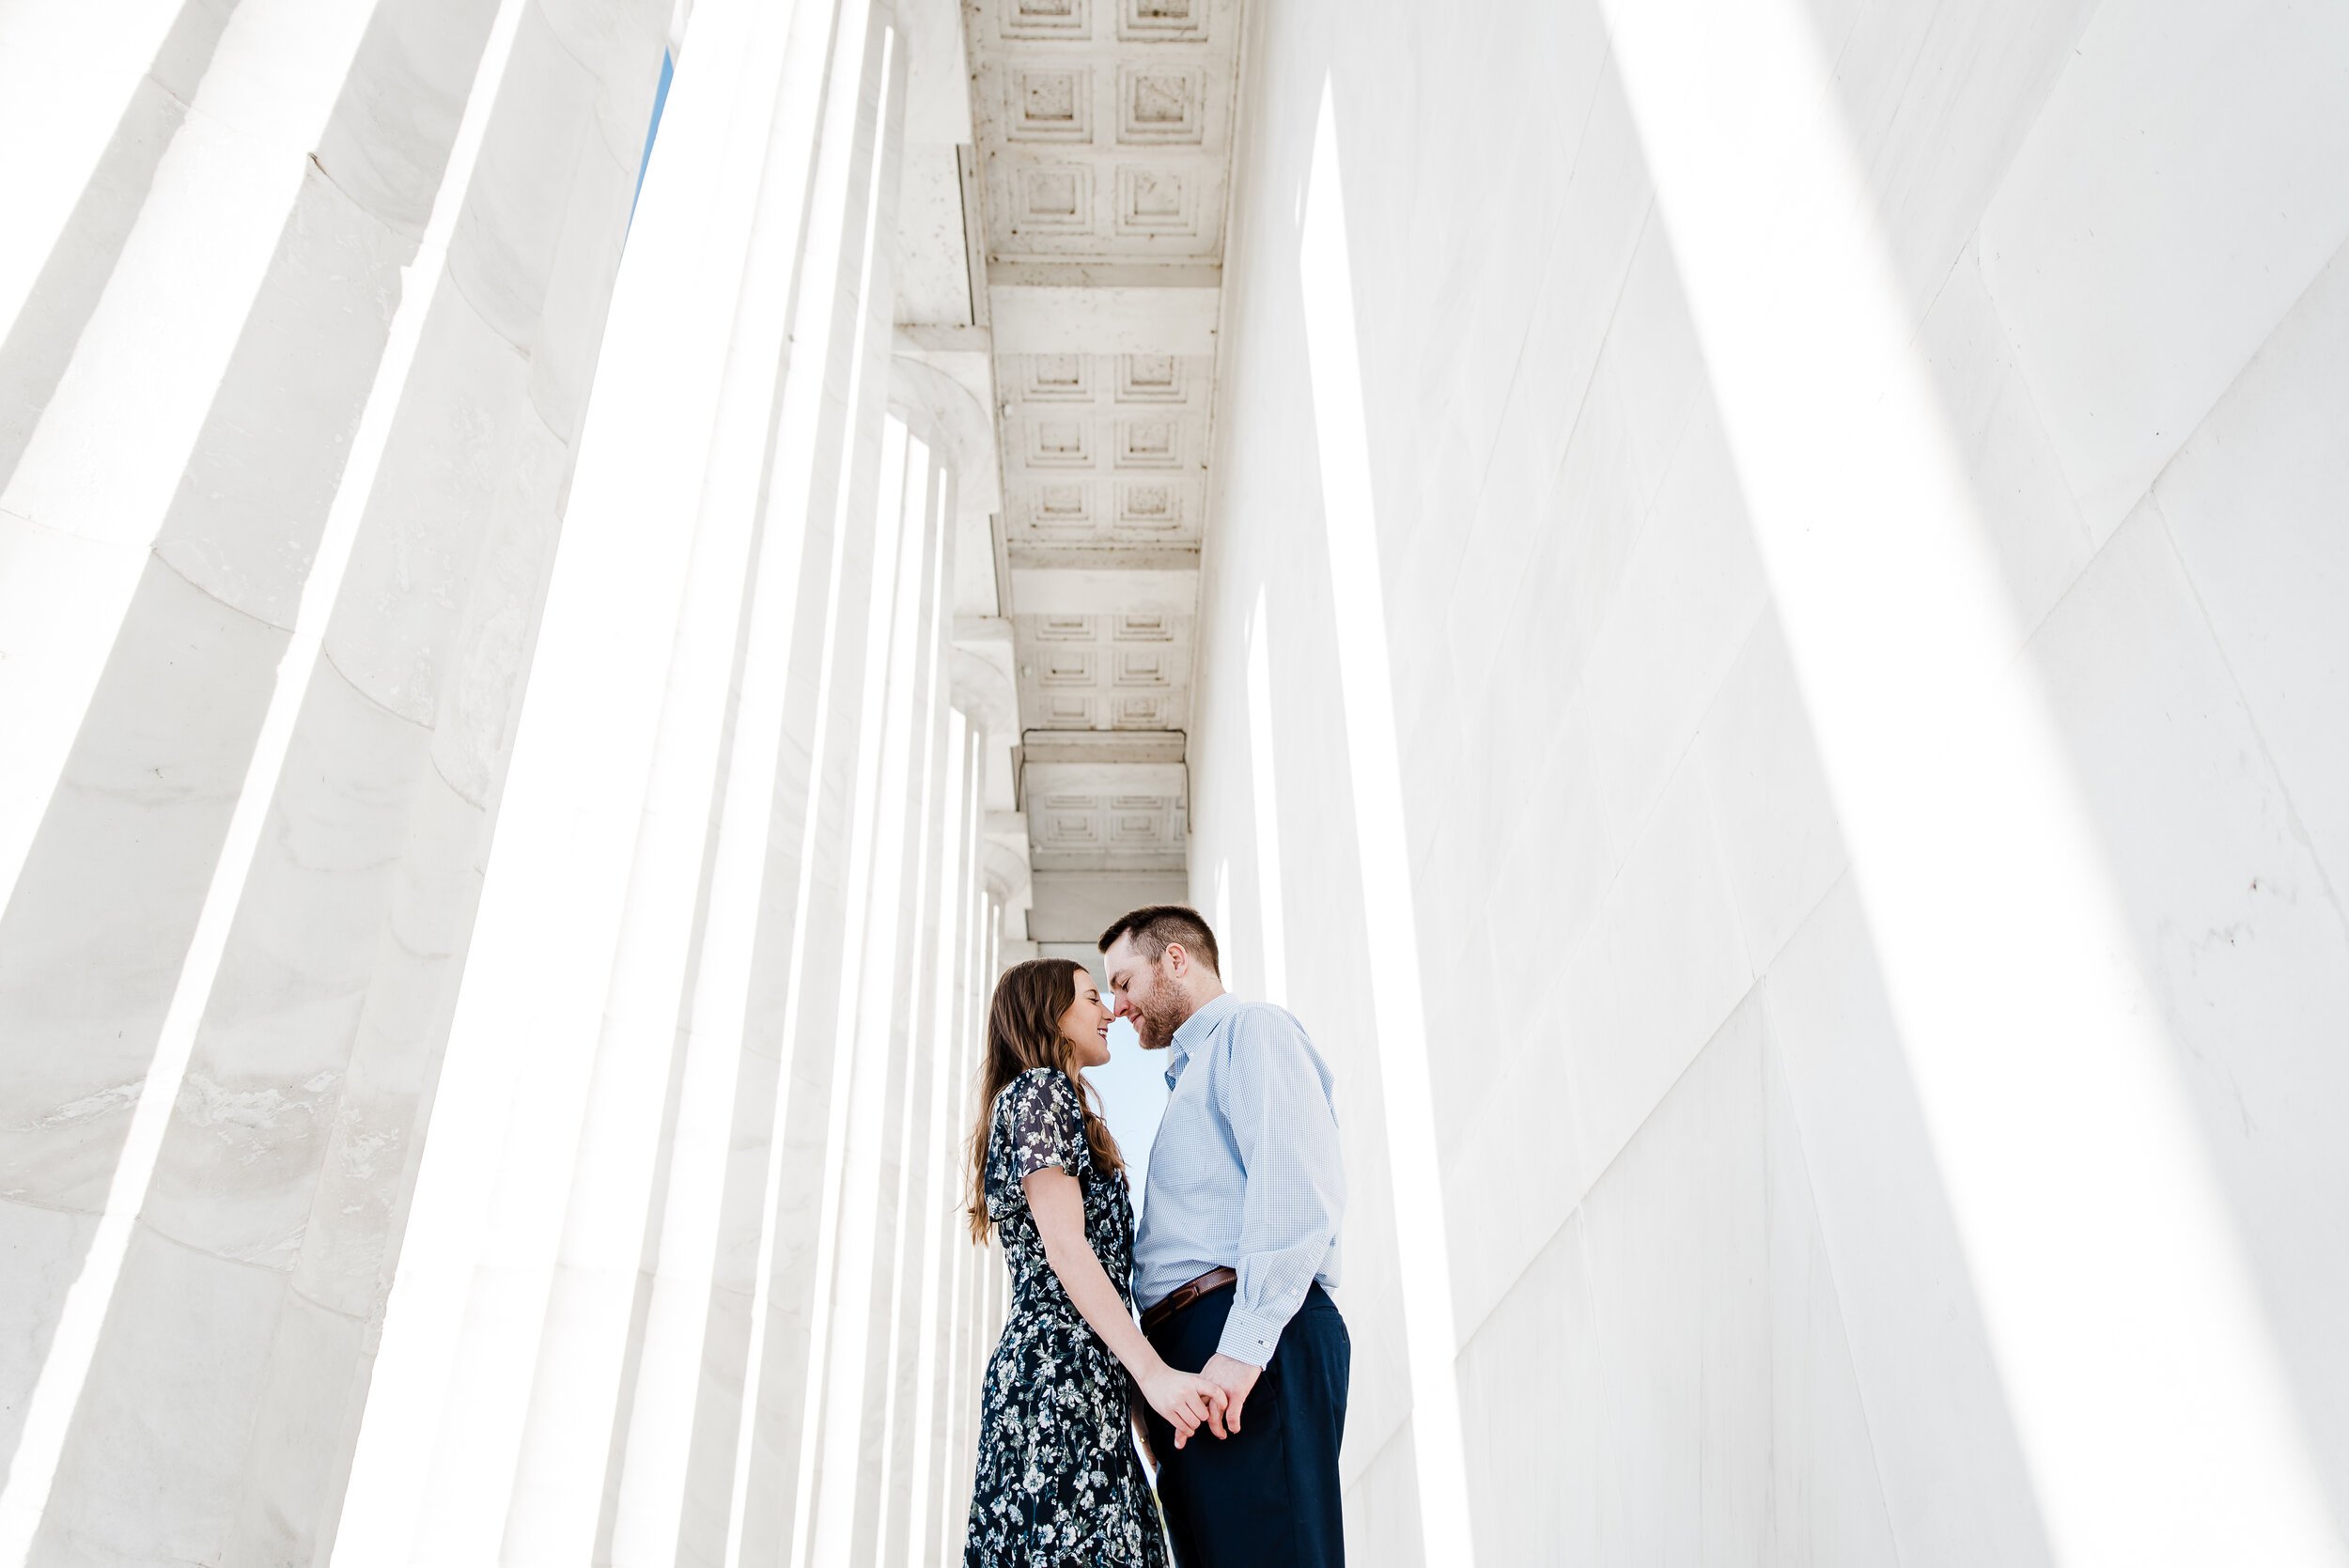 Our engagement in Washington DC